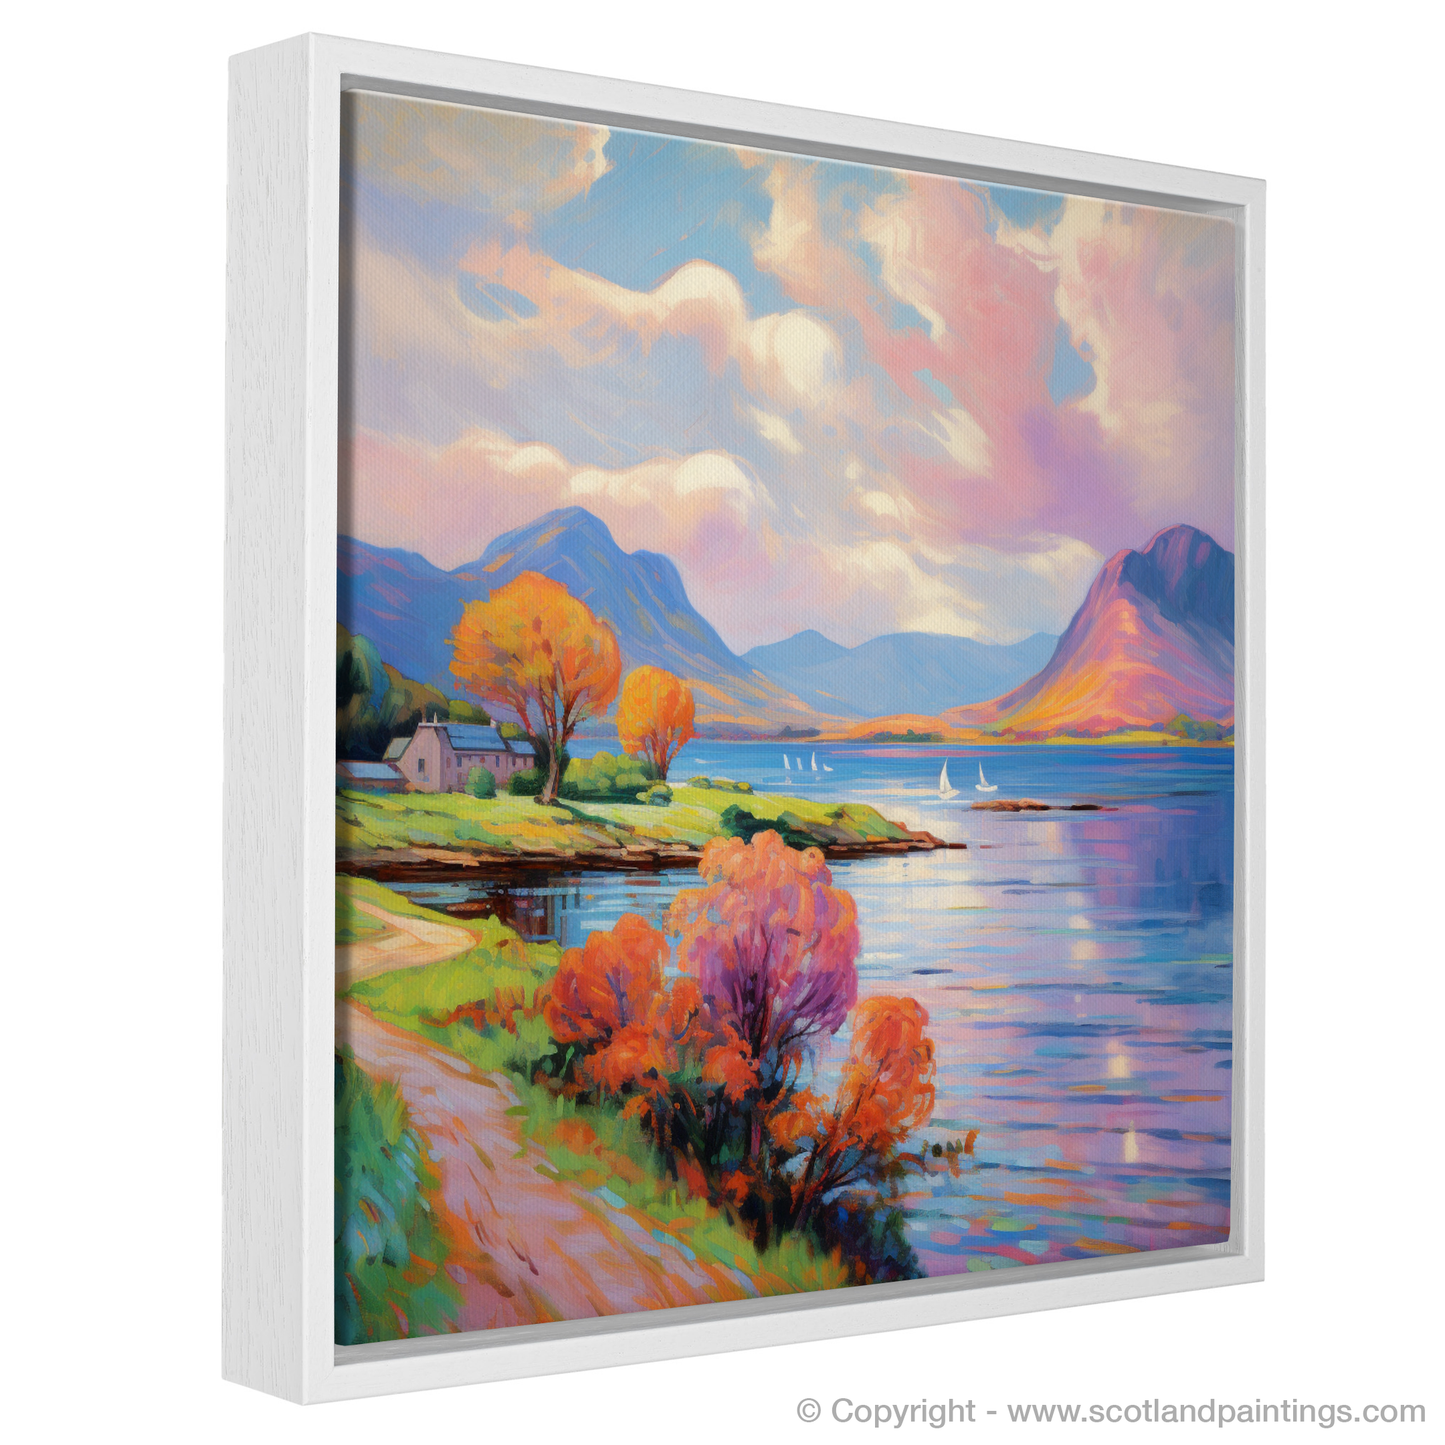 Painting and Art Print of Loch Leven, Highlands in summer entitled "Highland Summer Serenade at Loch Leven".